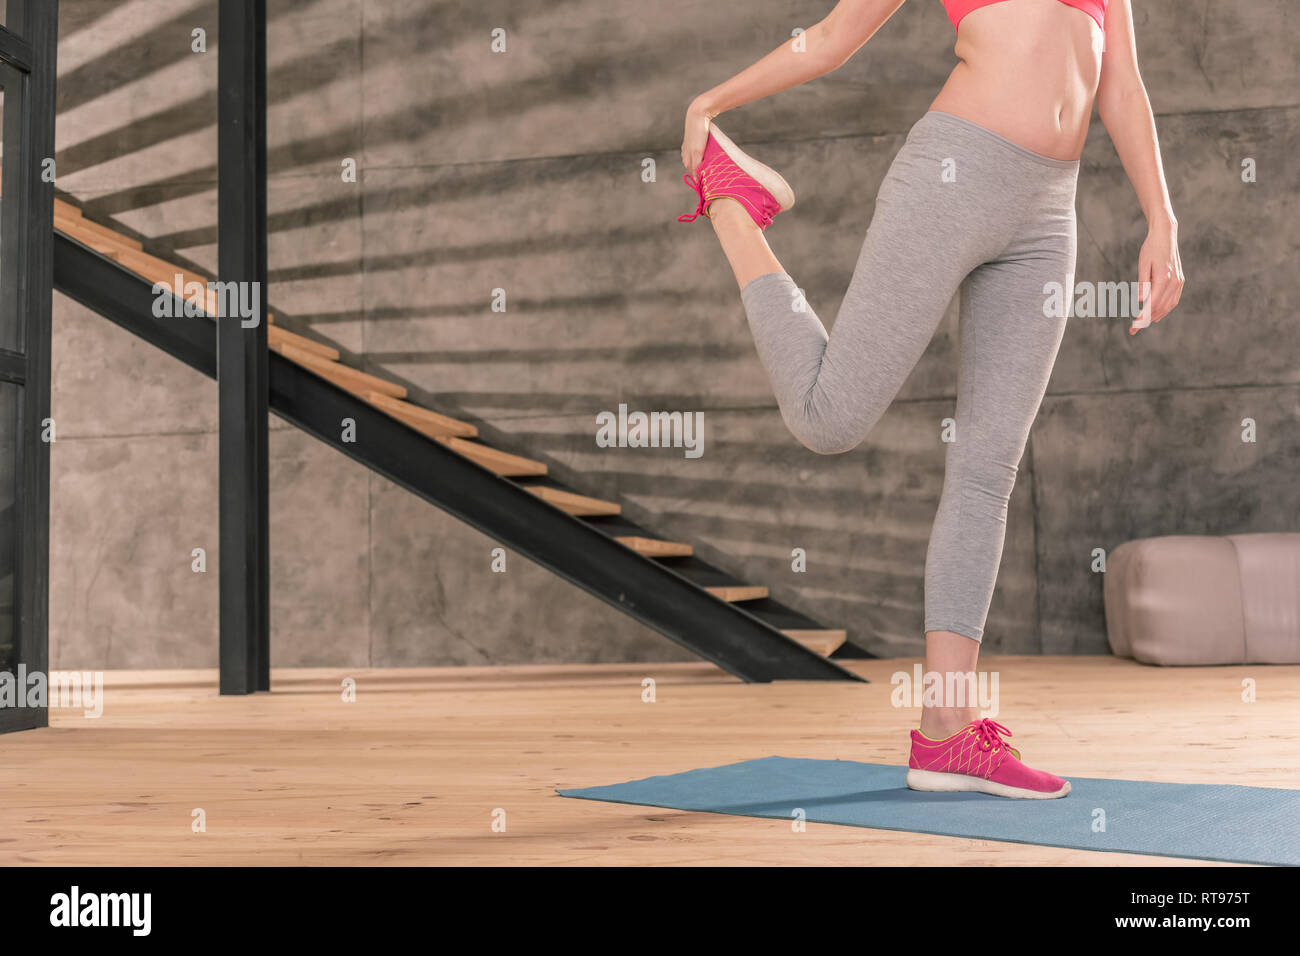 Sportswoman standing on blue mat and stretching legs after workout Stock Photo